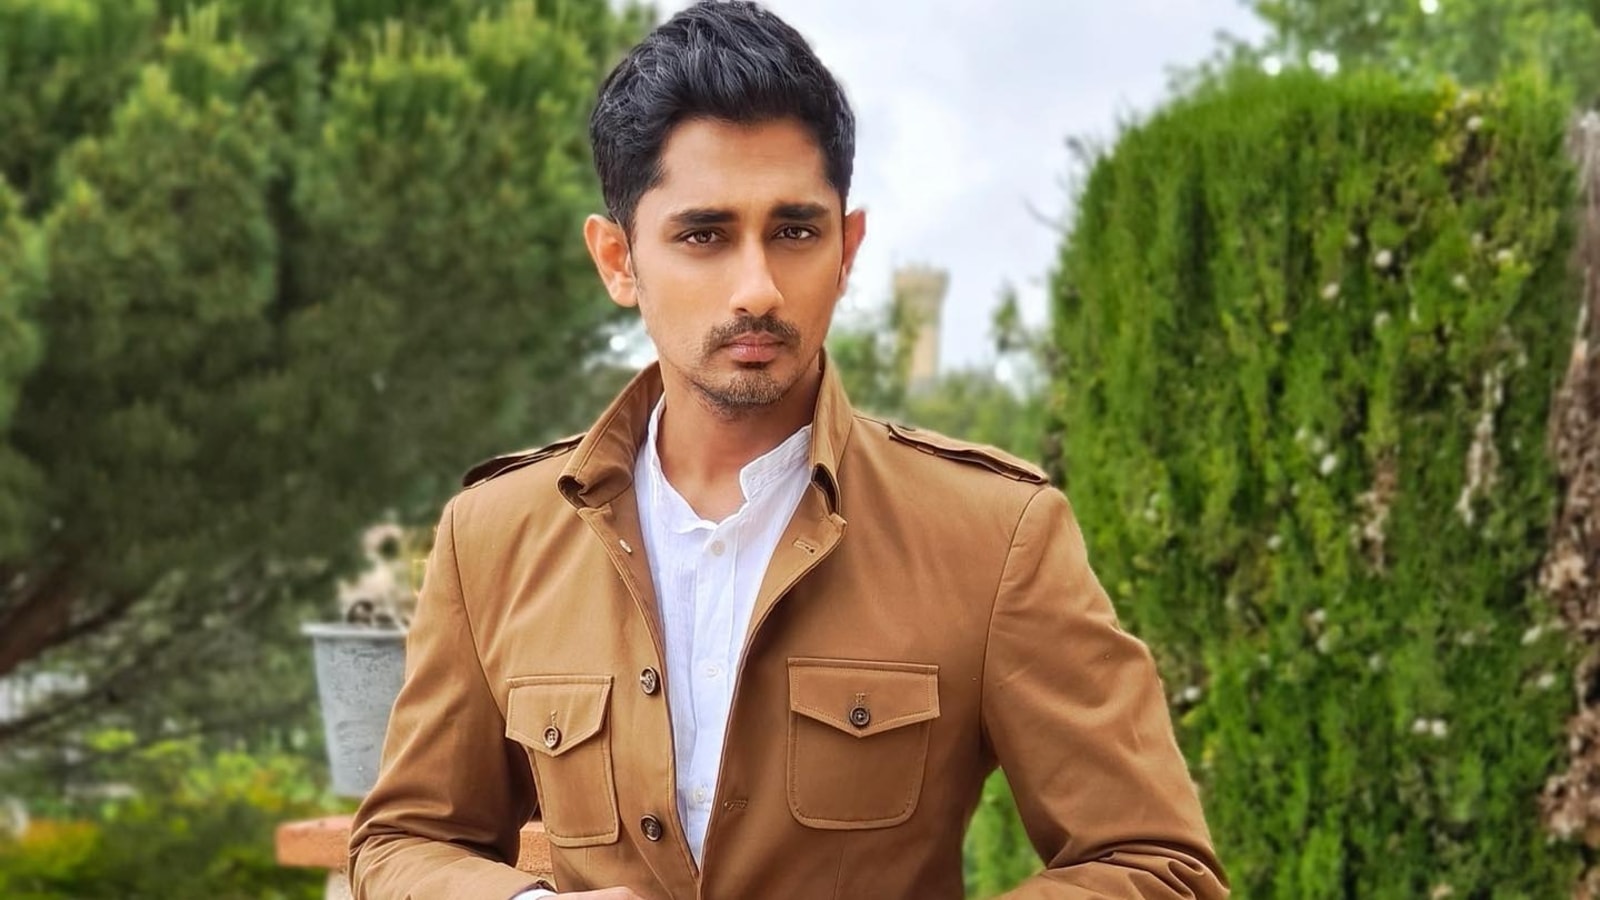 Siddharth pens note on mistreatment of family at Madurai airport, was told ‘it happens’: It was cruel, highly disturbing